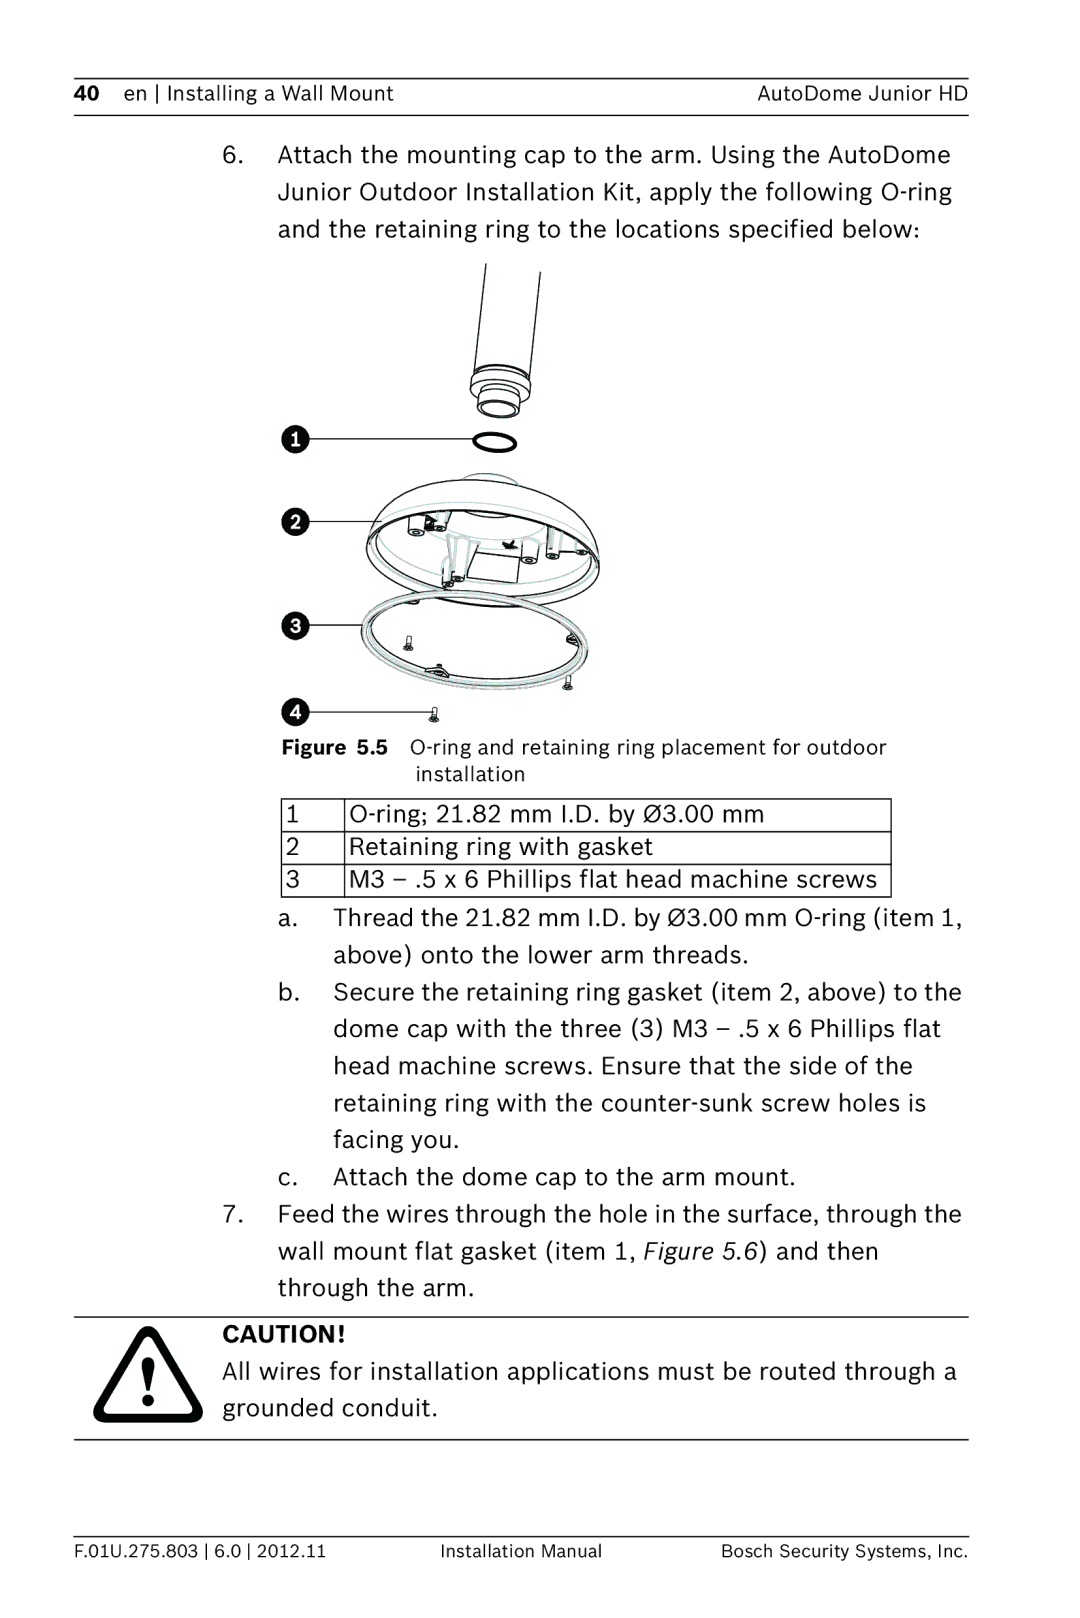 Bosch Appliances VJR SERIES installation manual O-ring and retaining ring placement for outdoor installation 